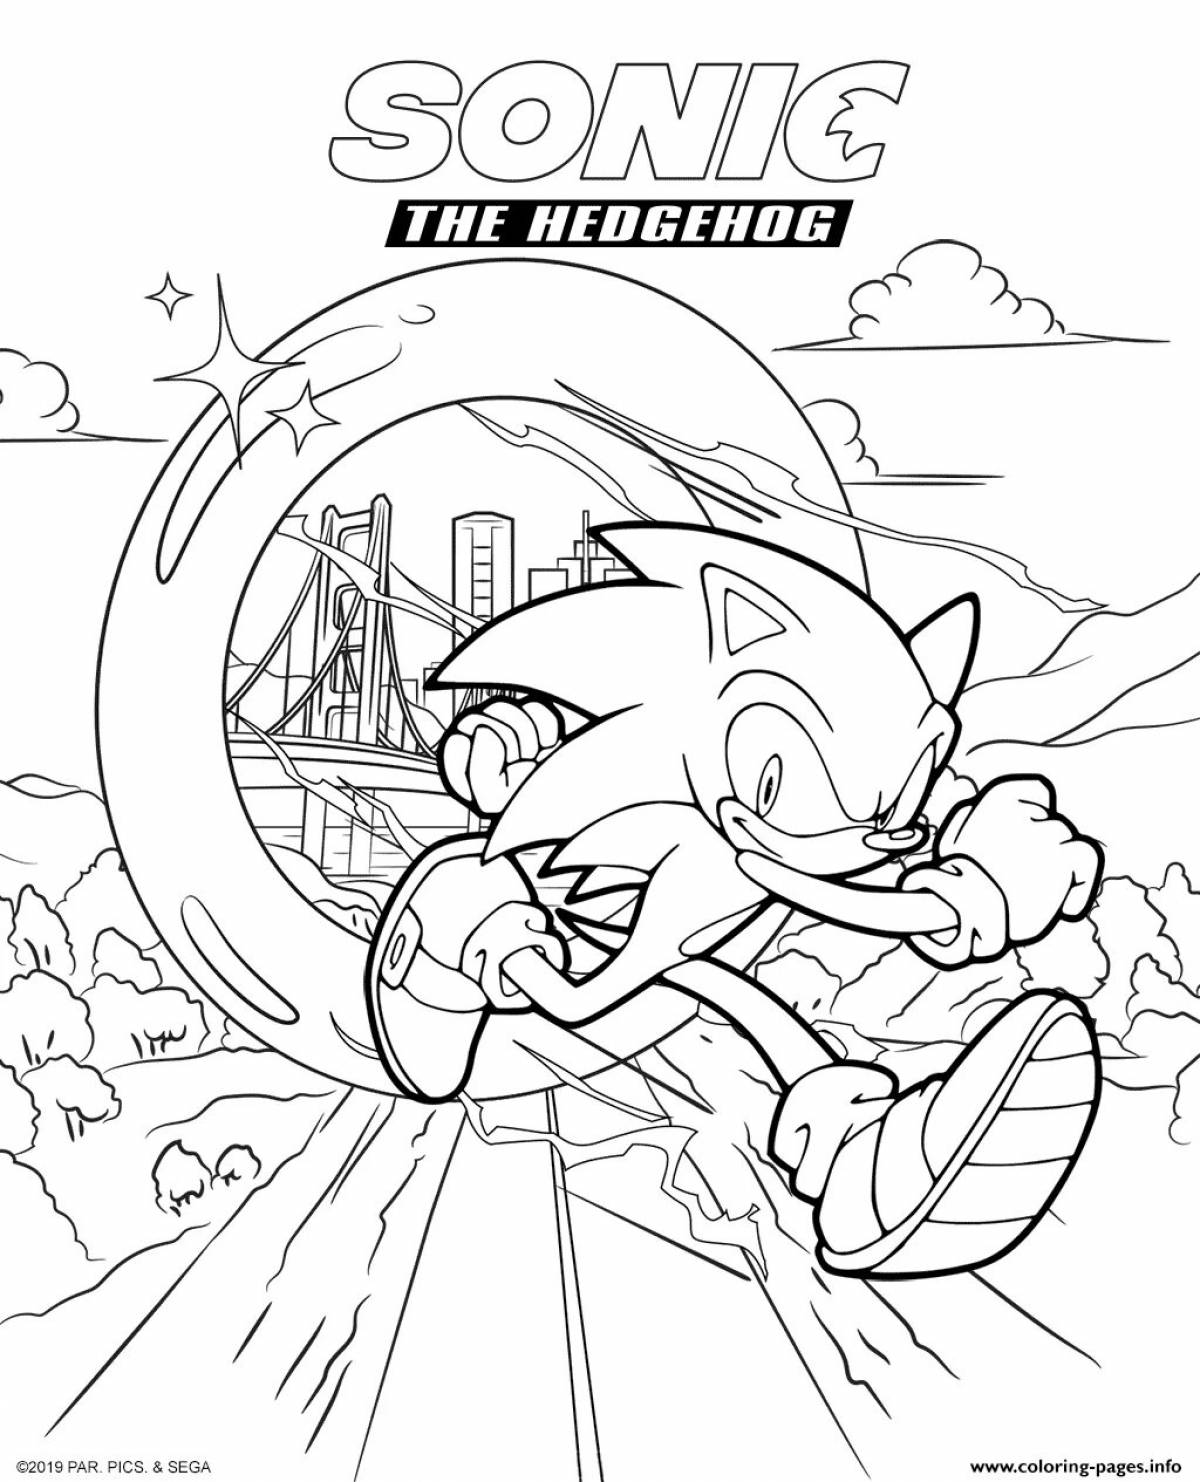 Sonic the hedgehog peaceful coloring